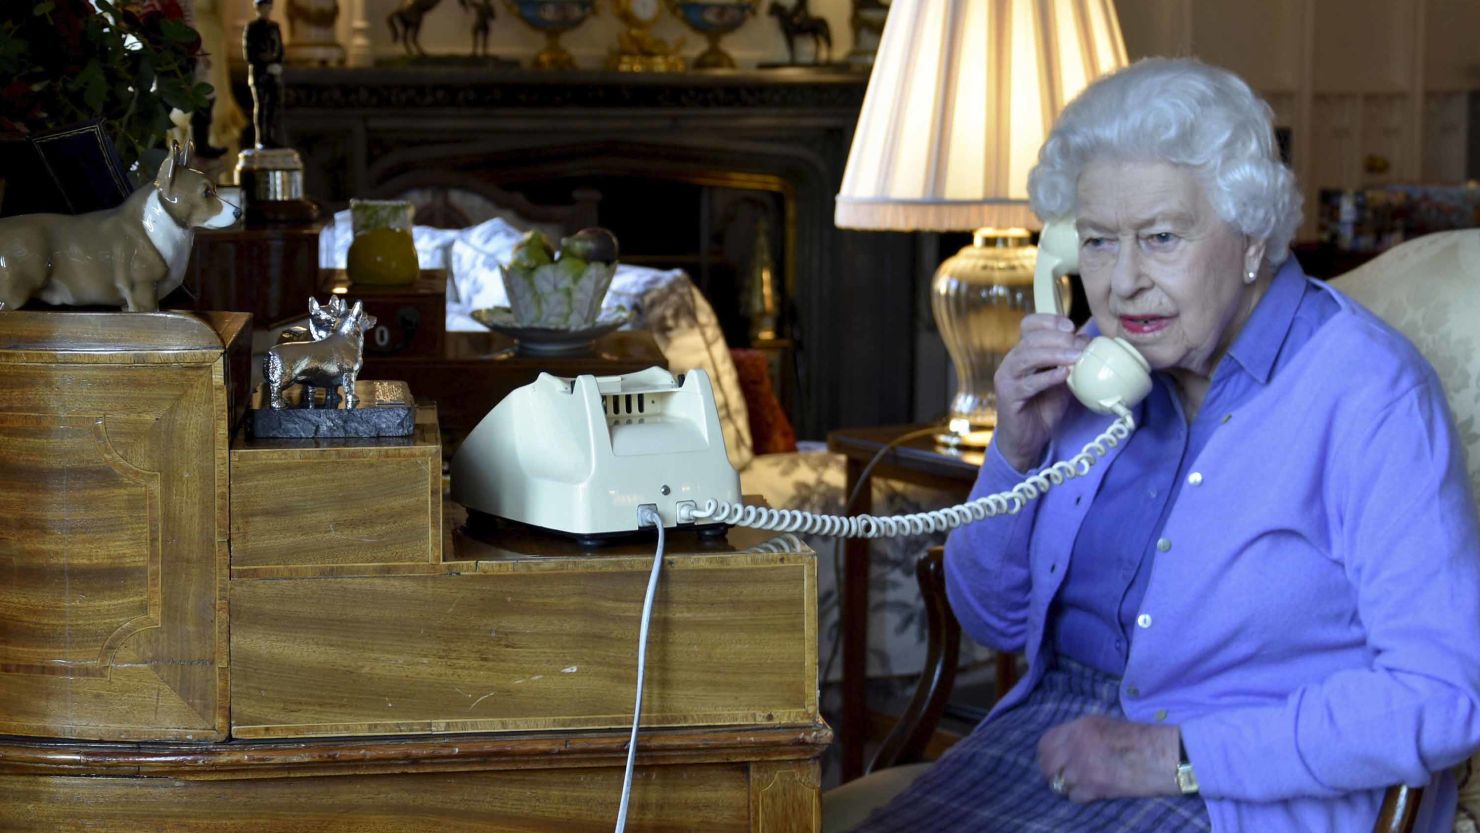 Britain's Queen Elizabeth II speaks to UK Prime Minister Boris Johnson from Windsor Castle on Wednesday, March 25, 2020, for her weekly audience.